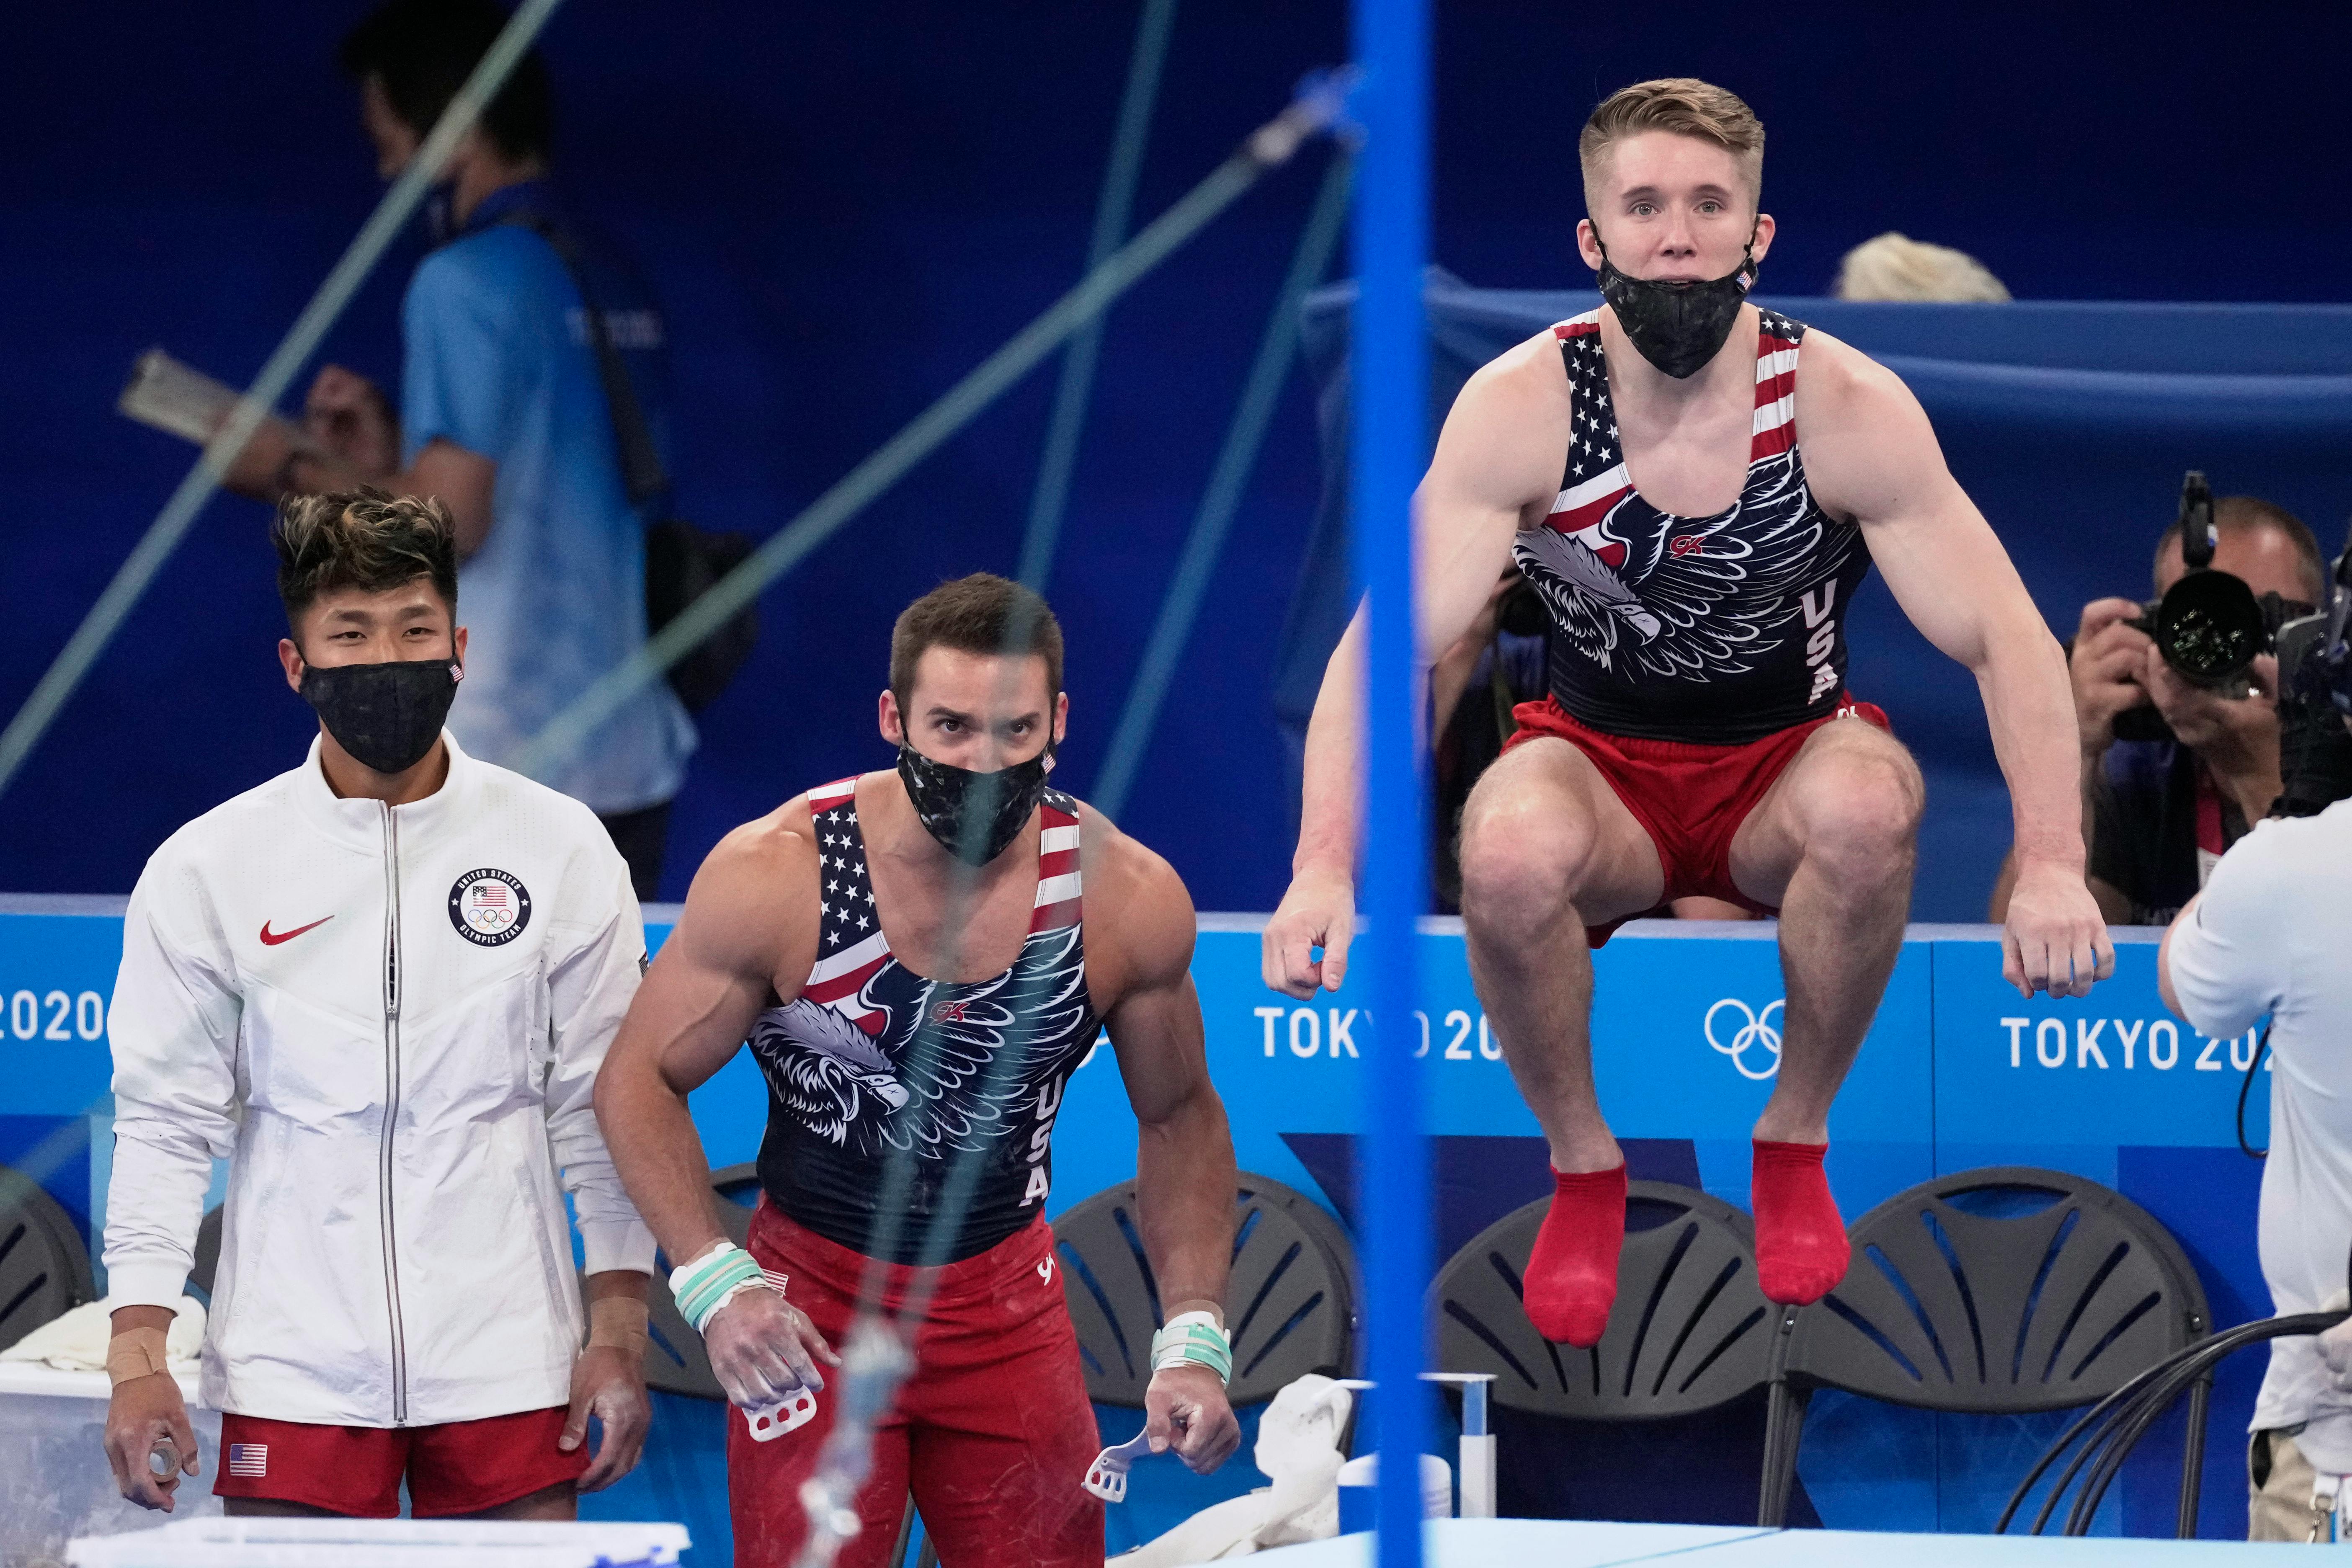 Soaking In The Olympic Moment Shane Wiskus And Usa Men Take Fifth In Team Gymnastics Final Star Tribune